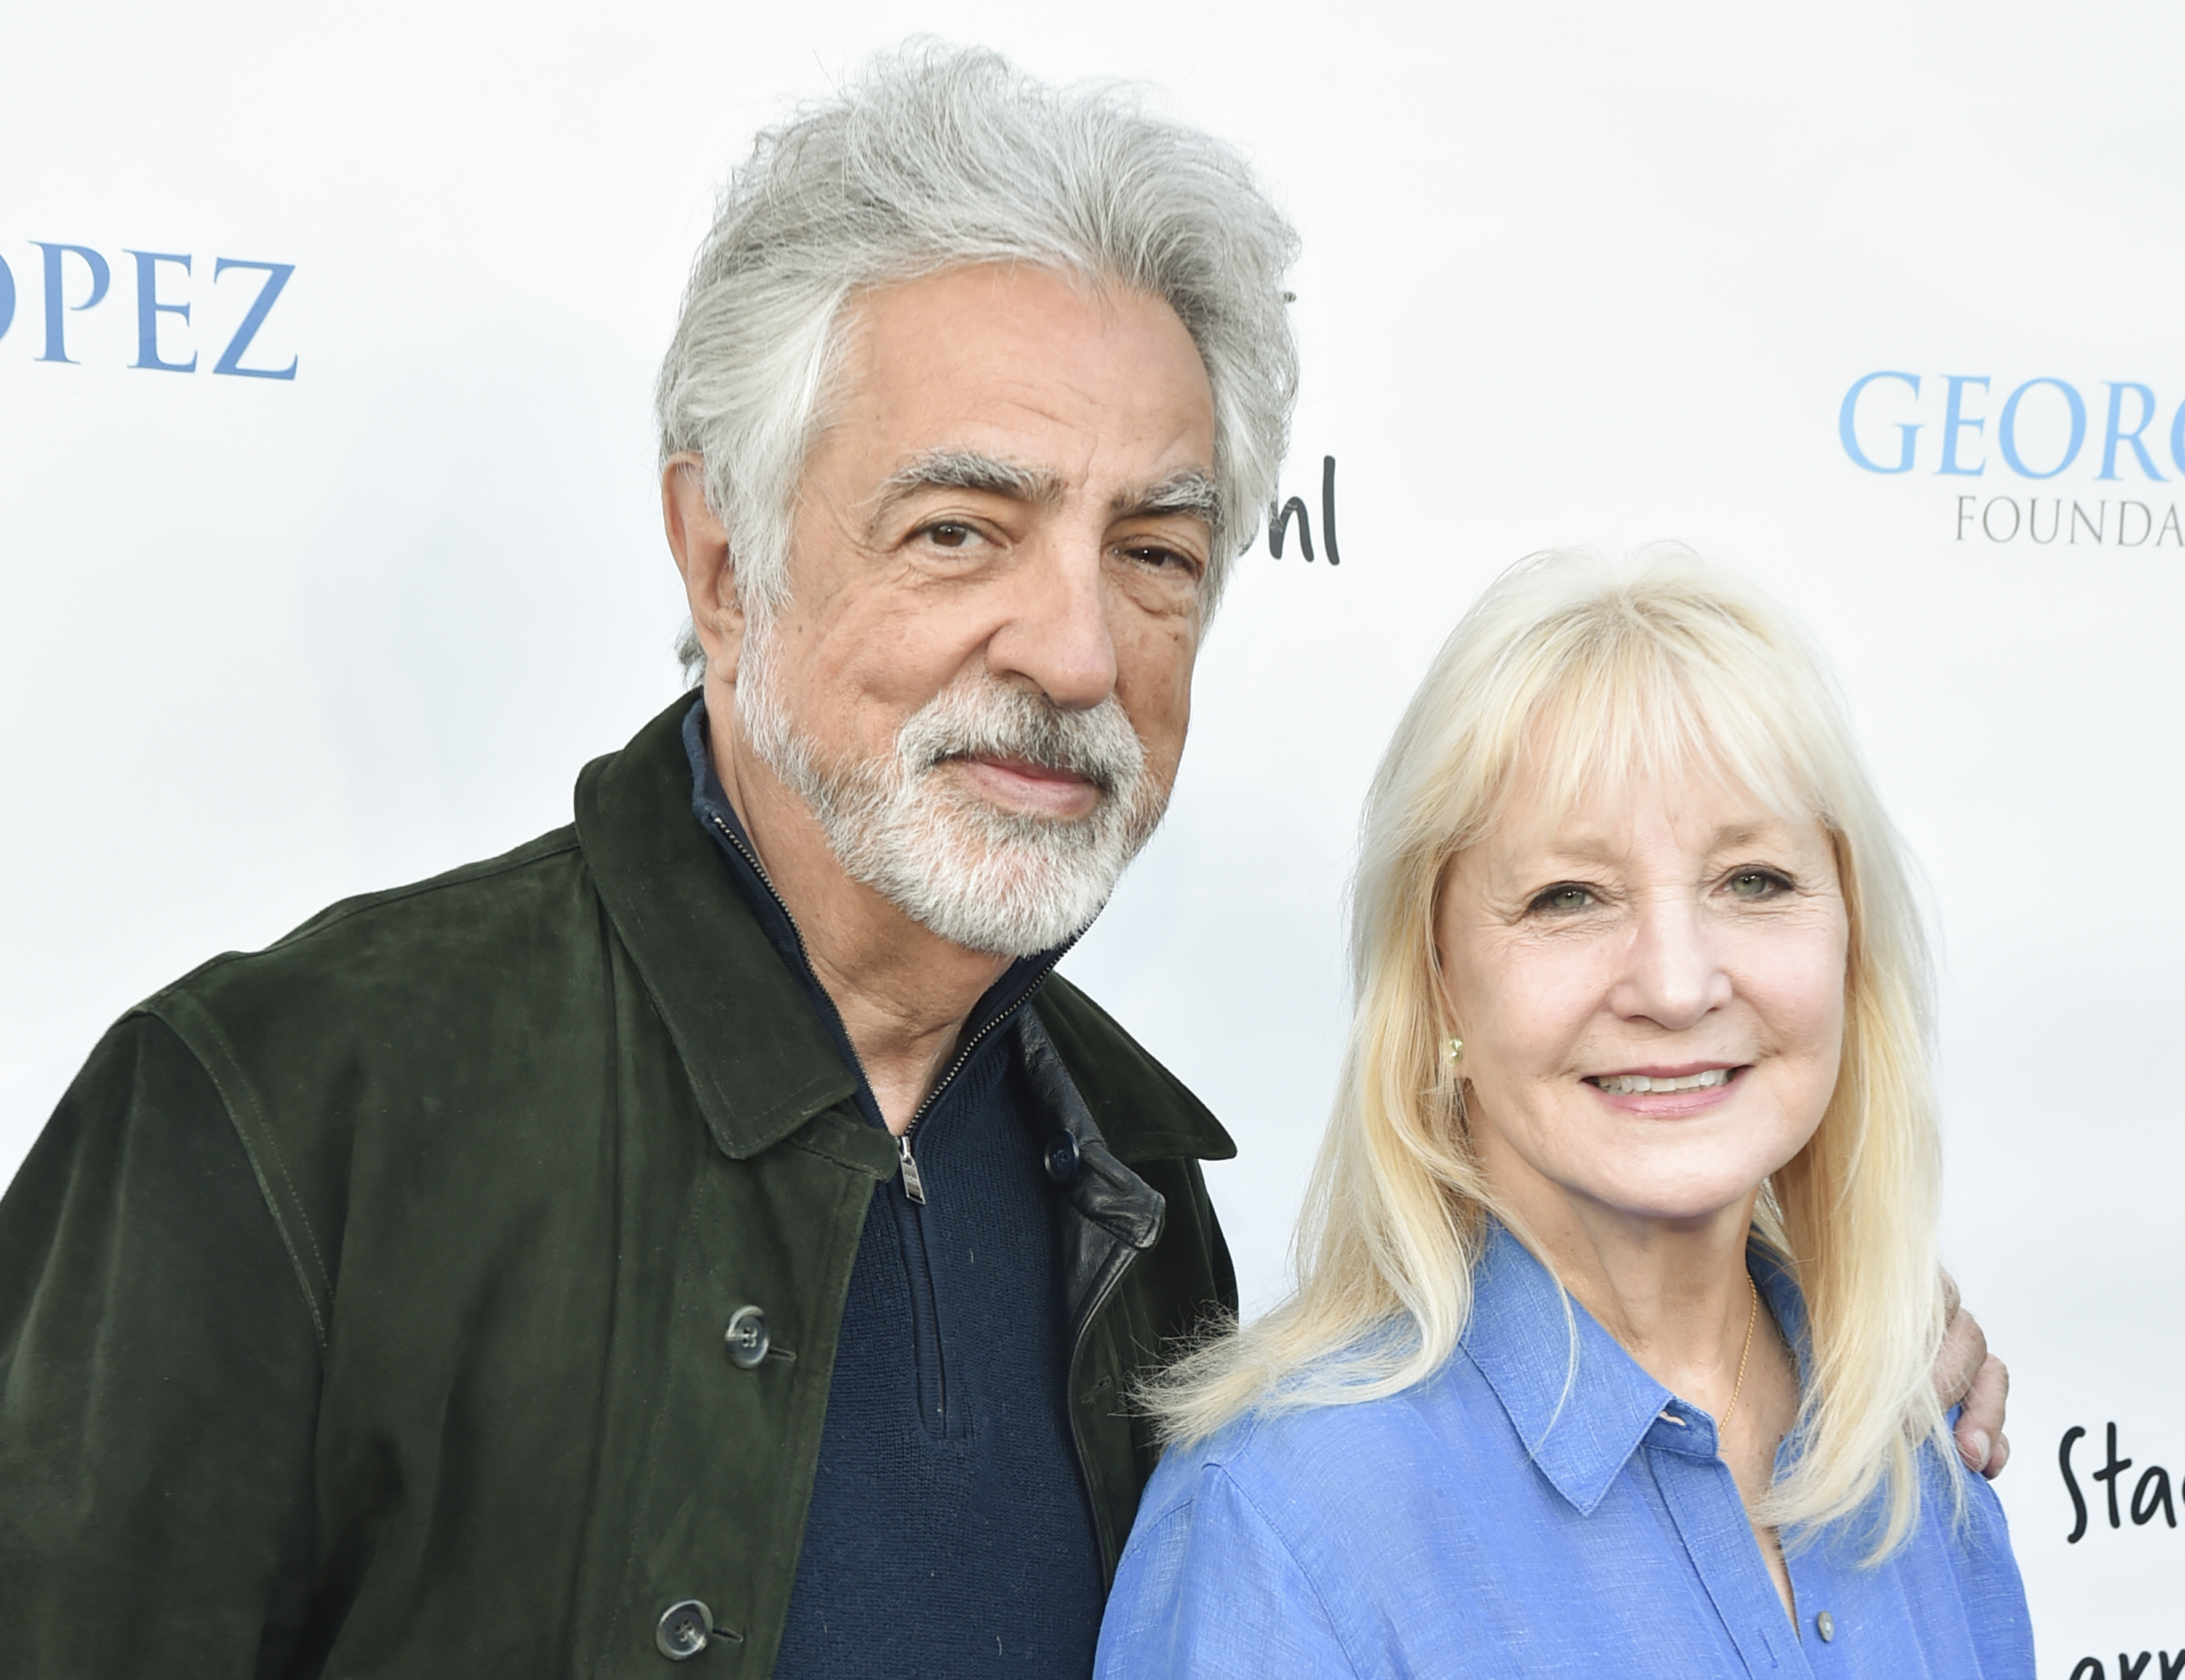 Joe Mantegna and Arlene Vhrel at George Lopez Foundation's 15th Annual Celebrity Golf Tournament in Los Angeles, California on May 1, 2022 | Source: Getty Images